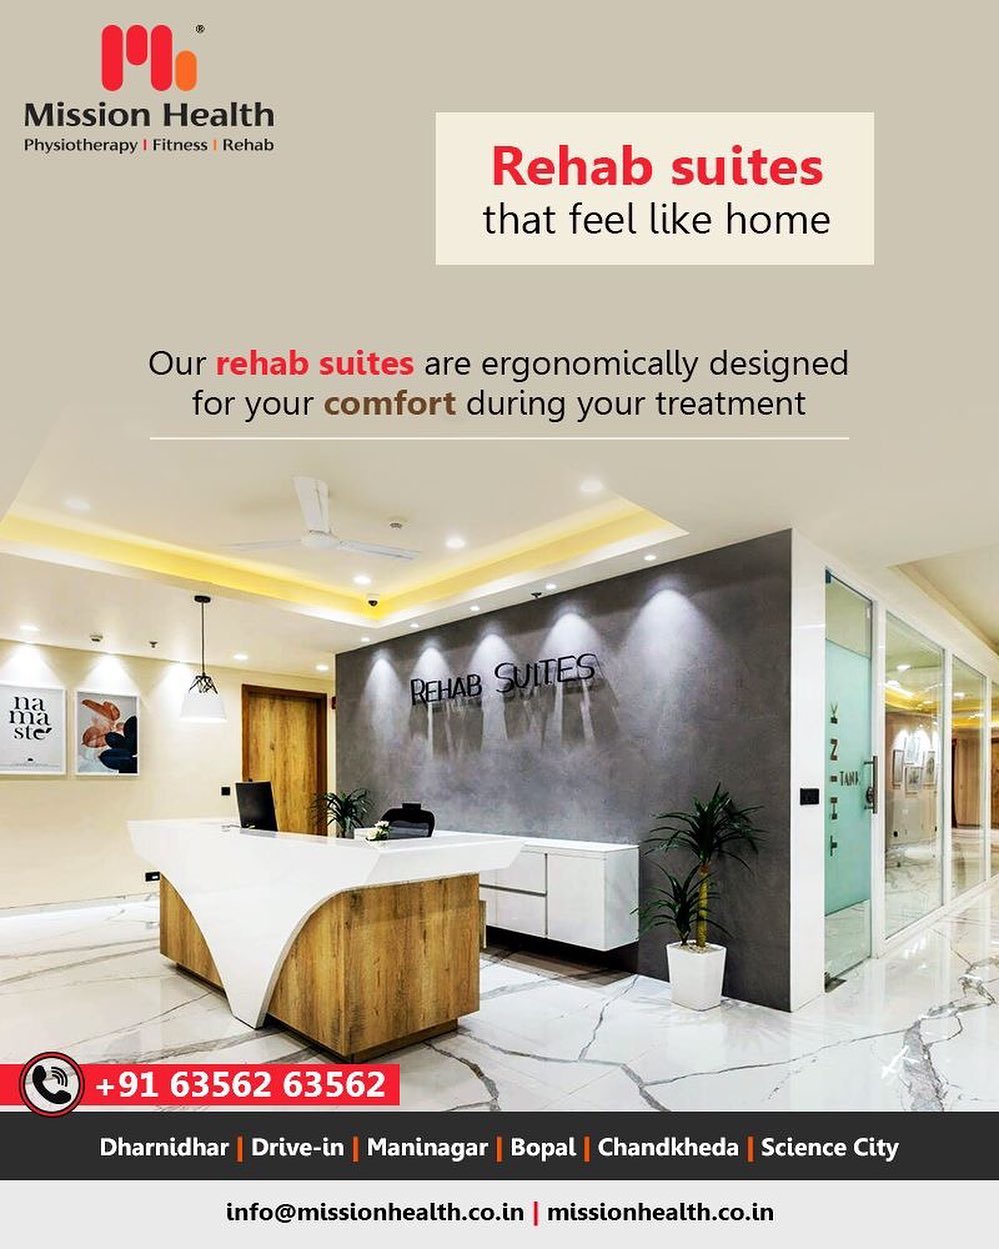 Our Rehab Suites are beautifully crafted and ergonomically designed for your comfort. Every suite has a natural view with customized amenities suited to your needs & according to your condition. The suites also have library access, lounge access & health cafe facilities for patients. 
#RehabSuites #MissionHealth #MissionHealthIndia #AbilityClinic #MovementIsLife